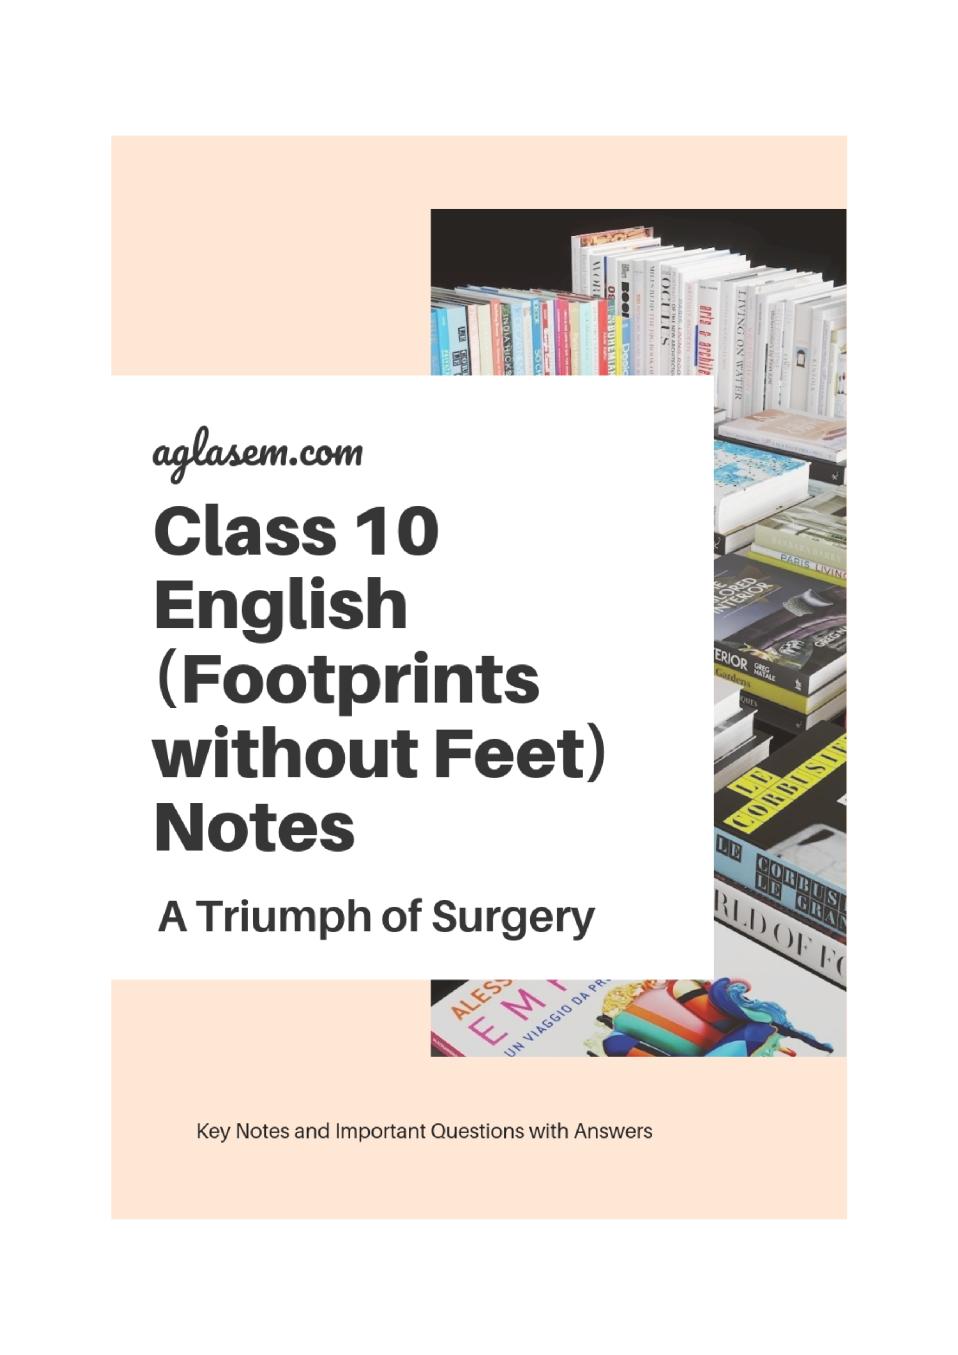 Class 10 English Footprints without Feet Notes For A Triumph of Surgery - Page 1